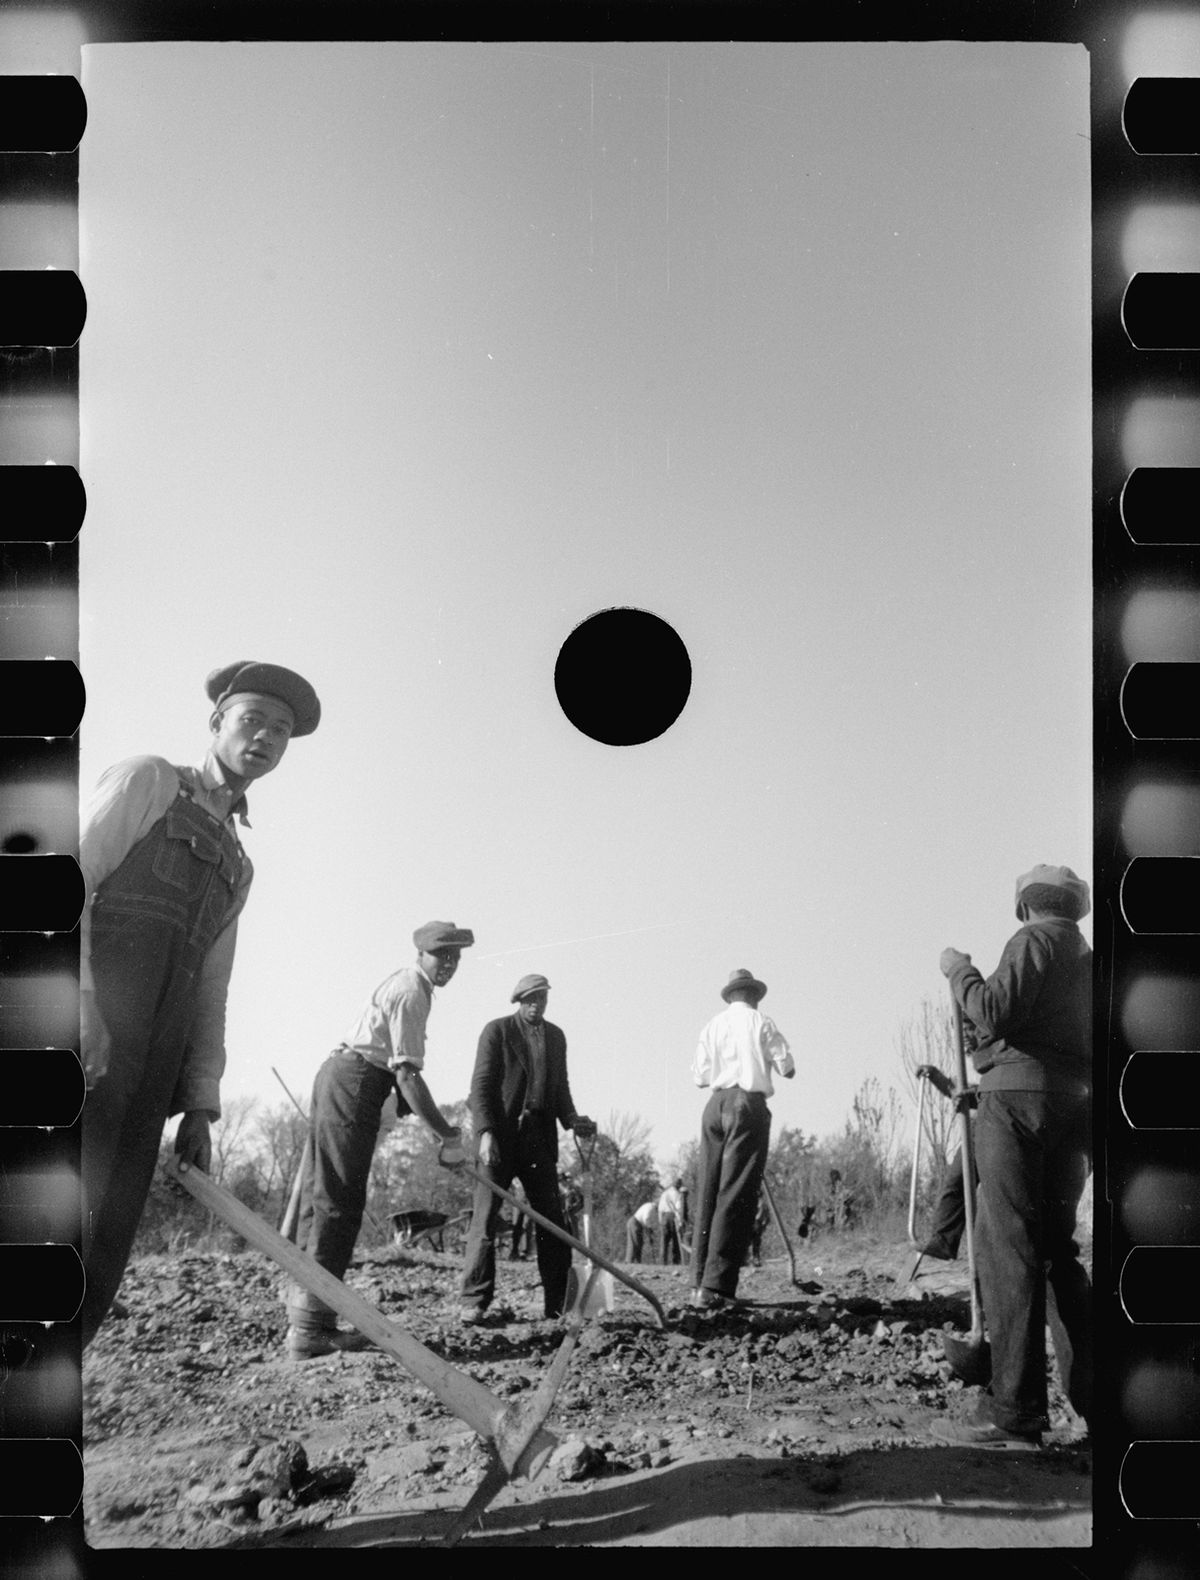 A photograph by Carl Mydans, possibly related to transients clearing land in Prince George's County, Maryland, November, 1935 Library of Congress, Prints & Photographs Division